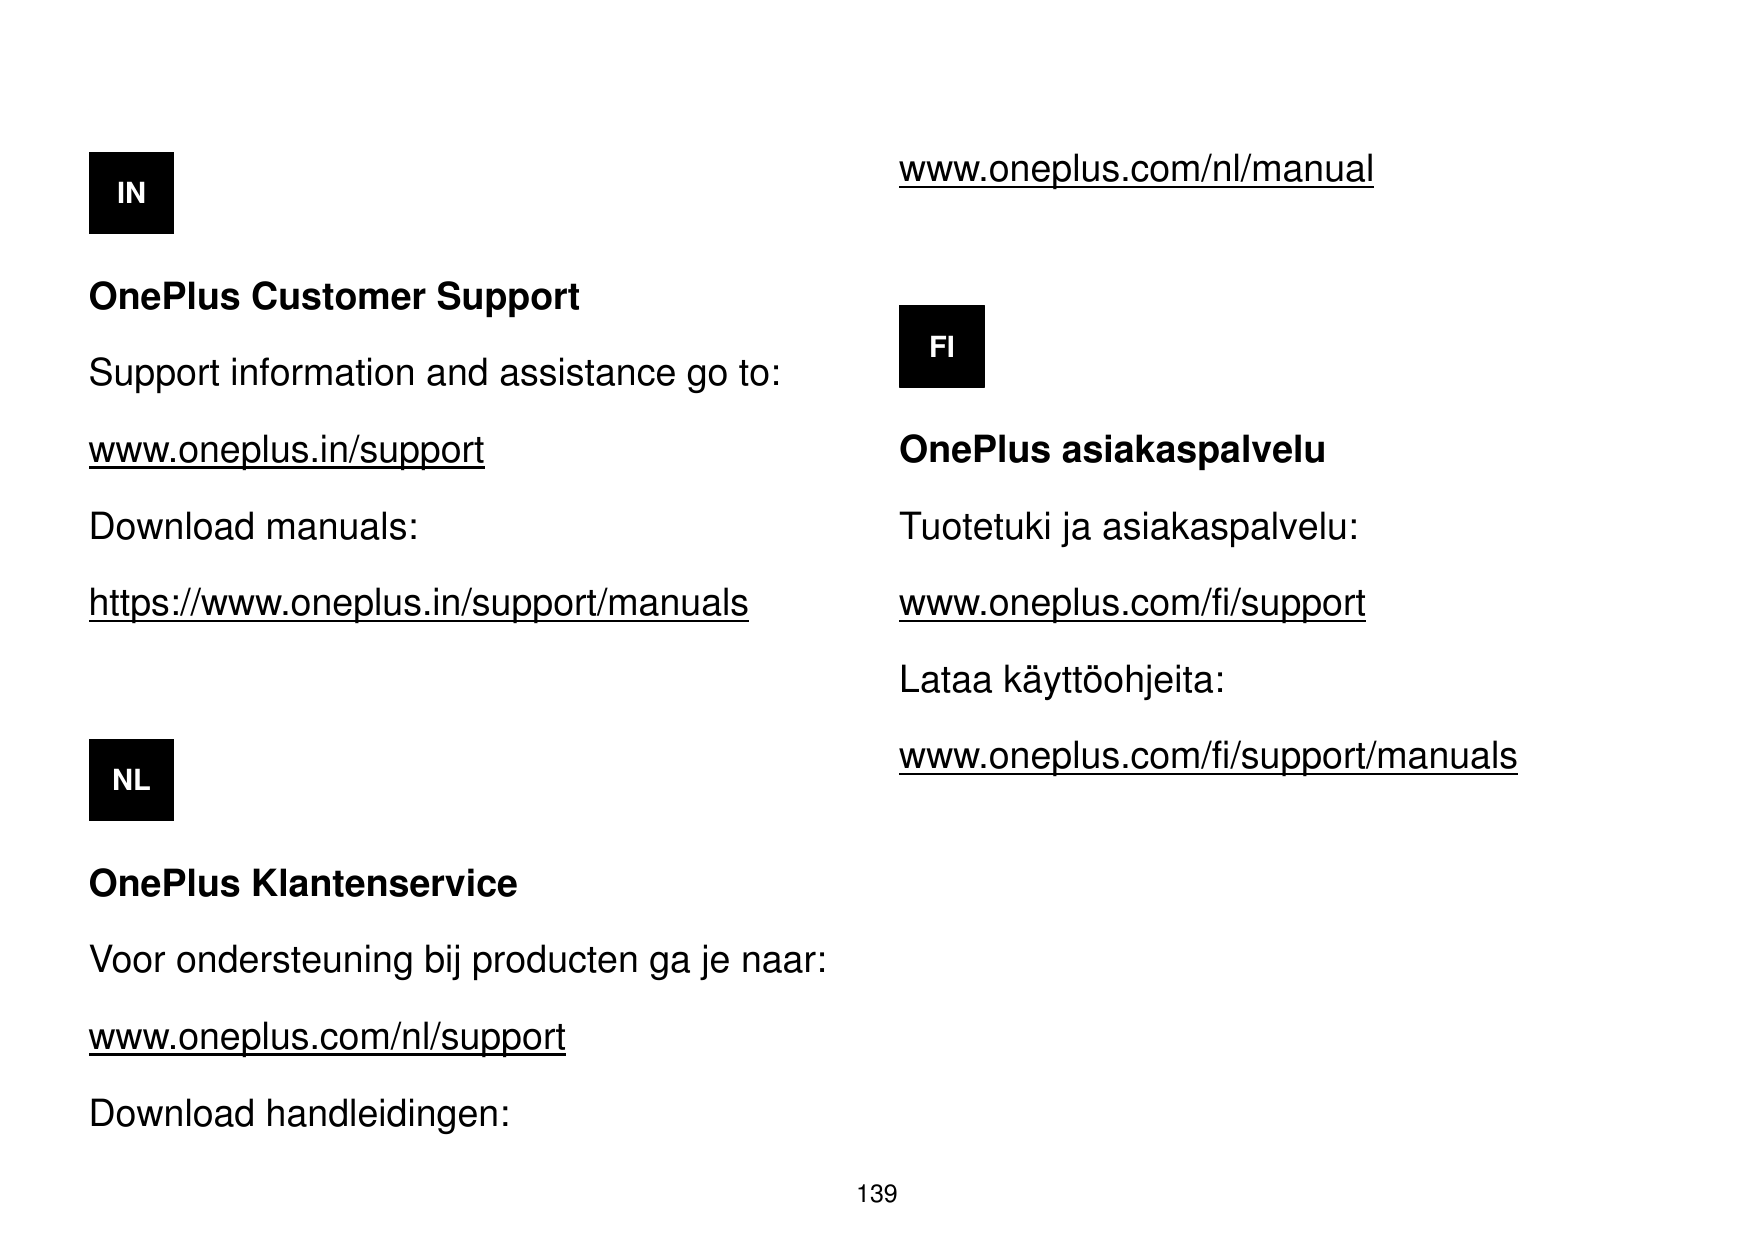 www.oneplus.com/nl/manualINOnePlus Customer SupportFISupport information and assistance go to:www.oneplus.in/supportOnePlus asia